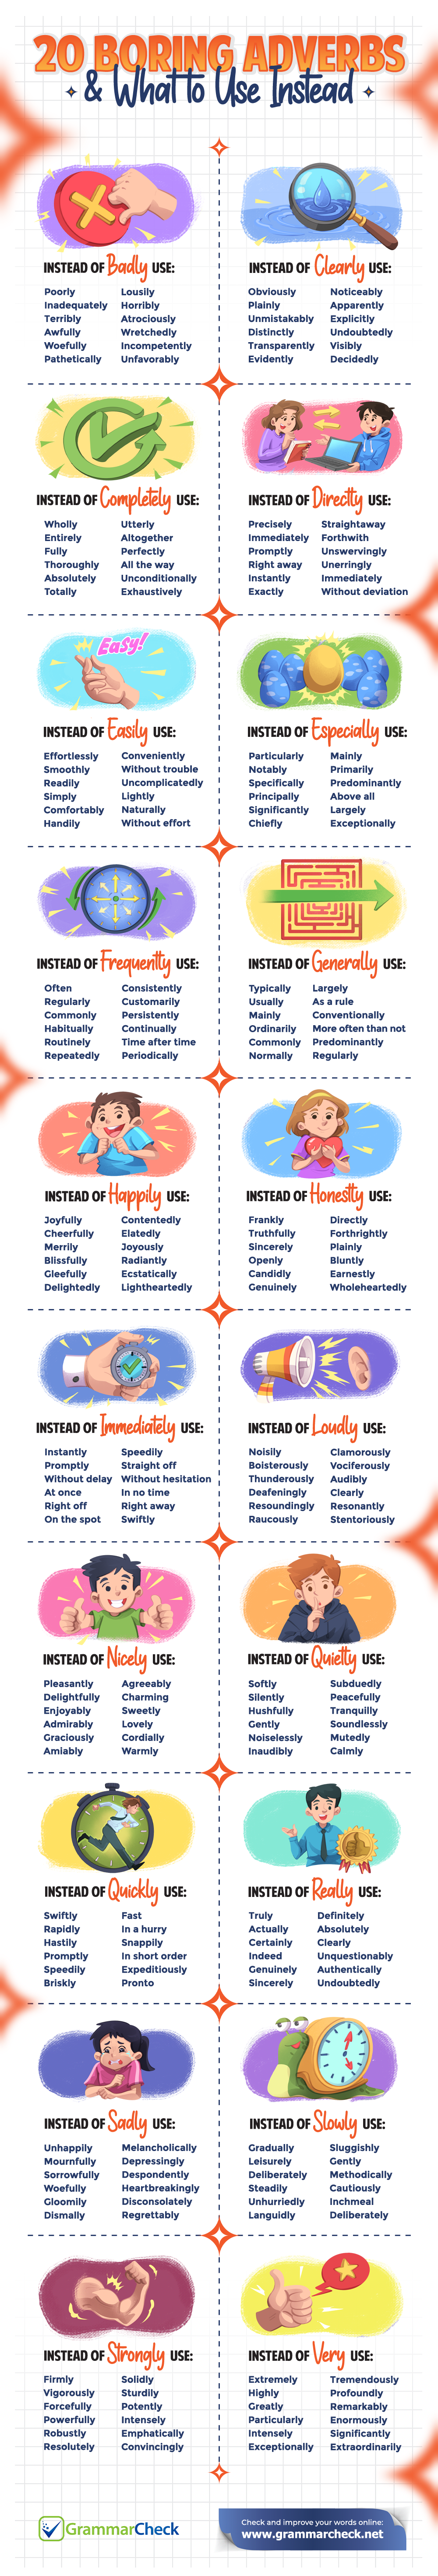 20 Boring Adverbs & What to Use Instead (Infographic)